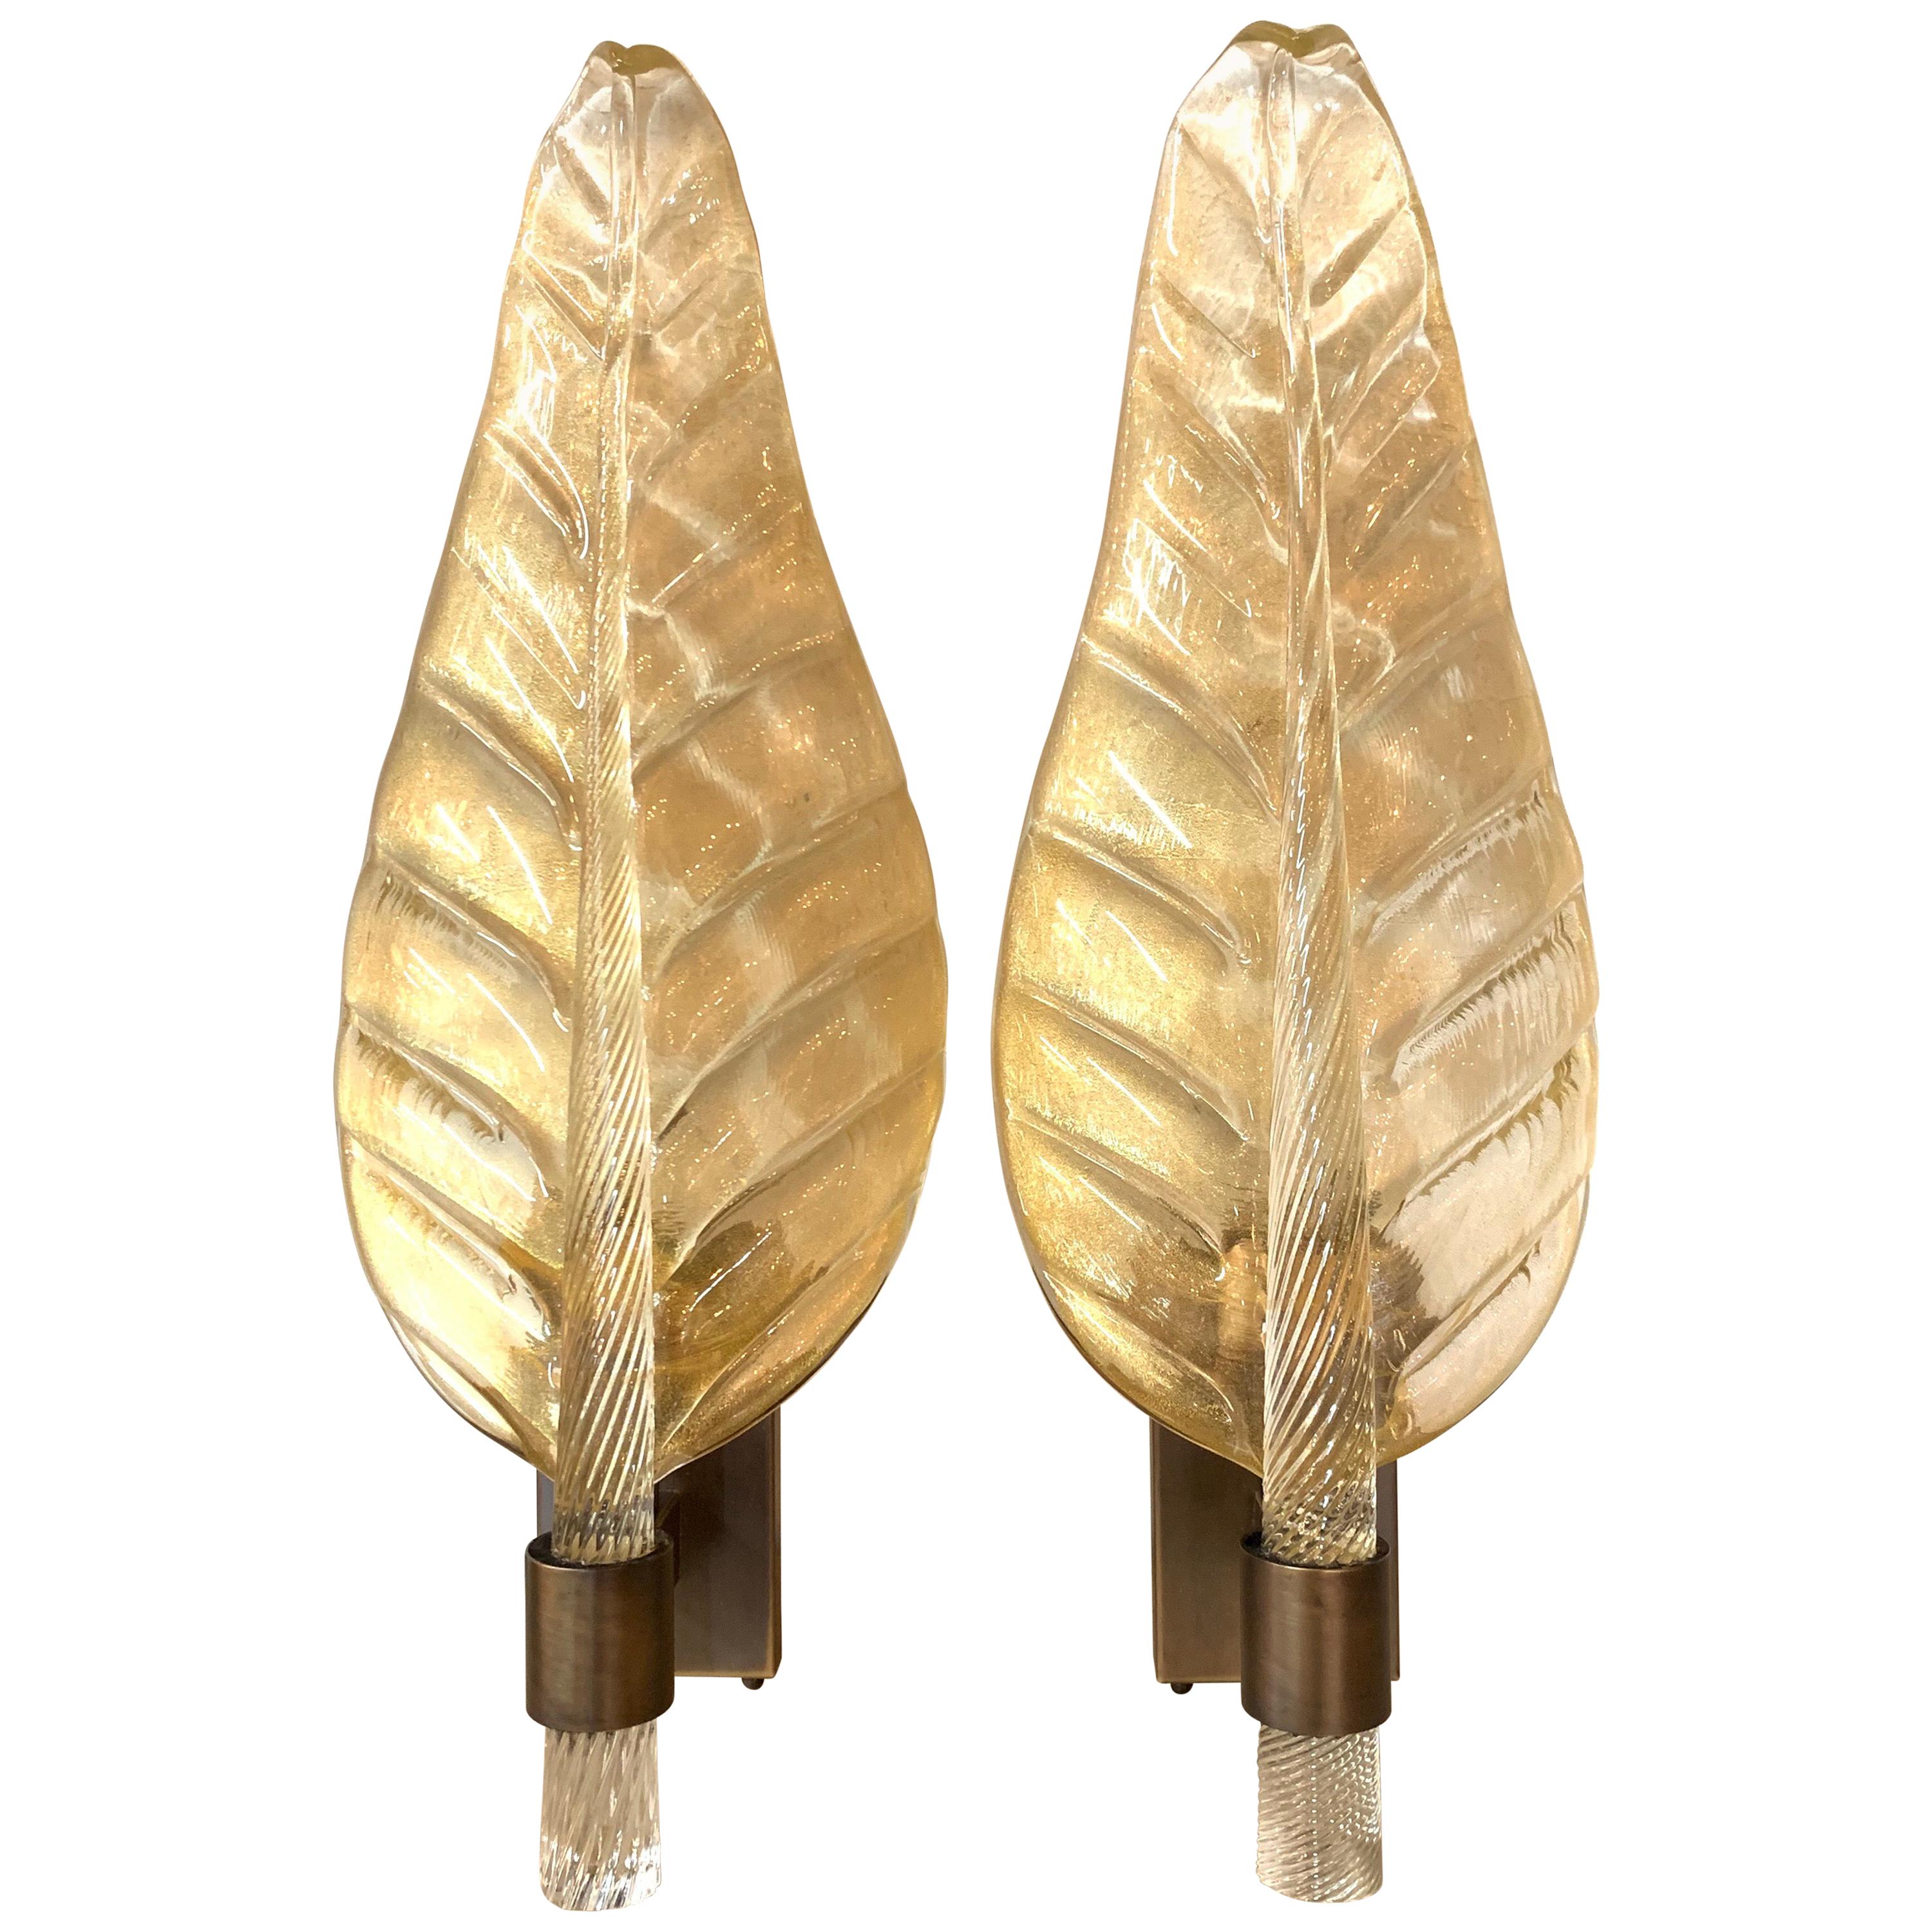 Pair of Large Scale Murano Glass Leaf Form Sconces